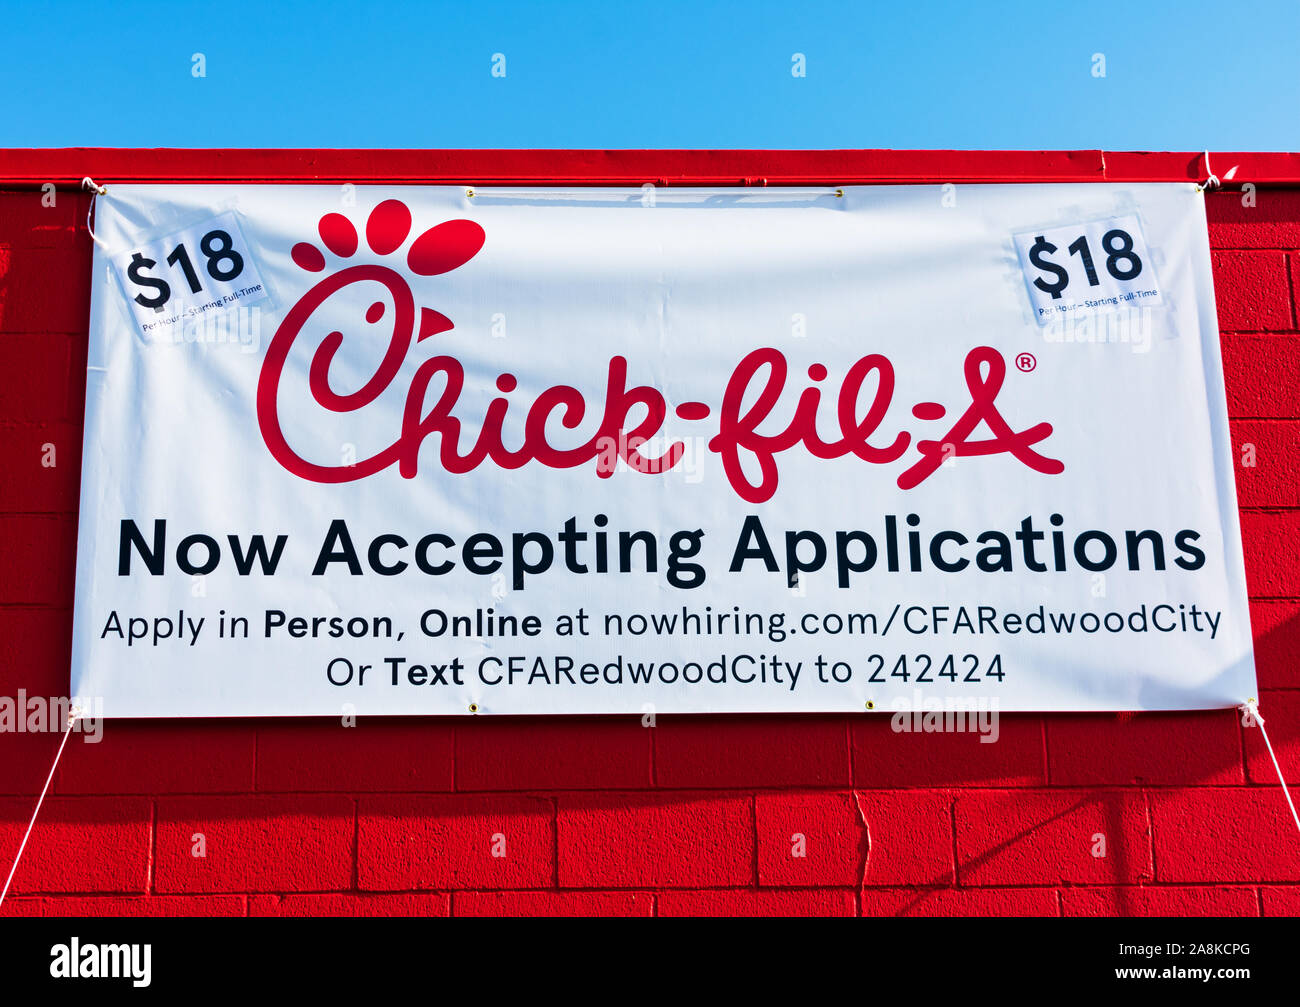 ChickfilA fast food restaurant advertisement for employment advertise